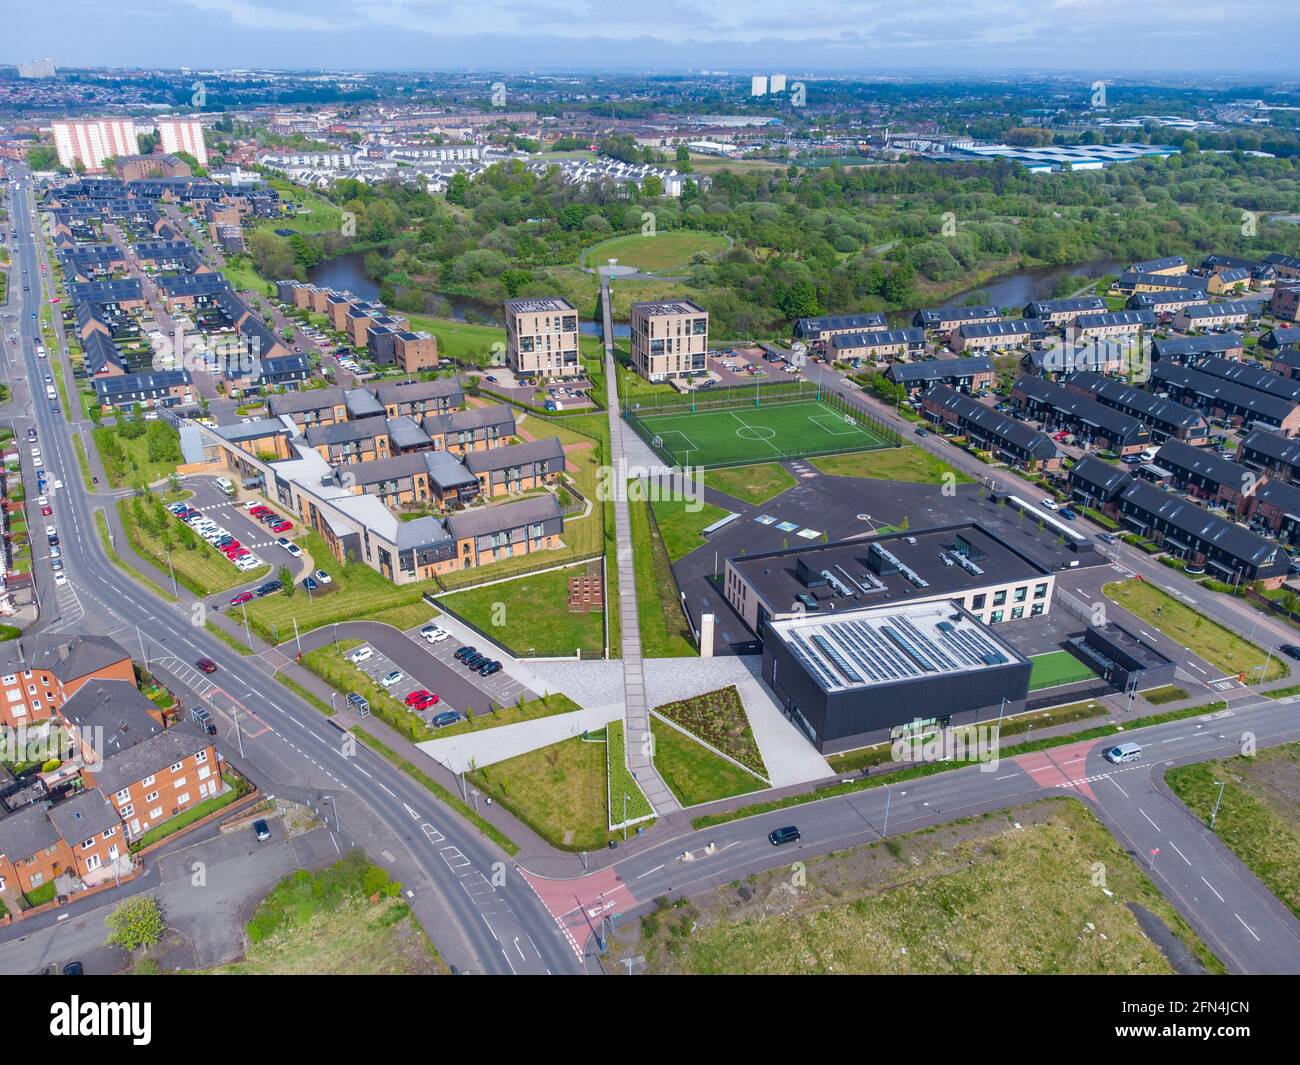 Aerial view of former Athletes Village modern housing development on banks of River Clyde at Dalmarnock, Glasgow, Scotland, UK Stock Photo